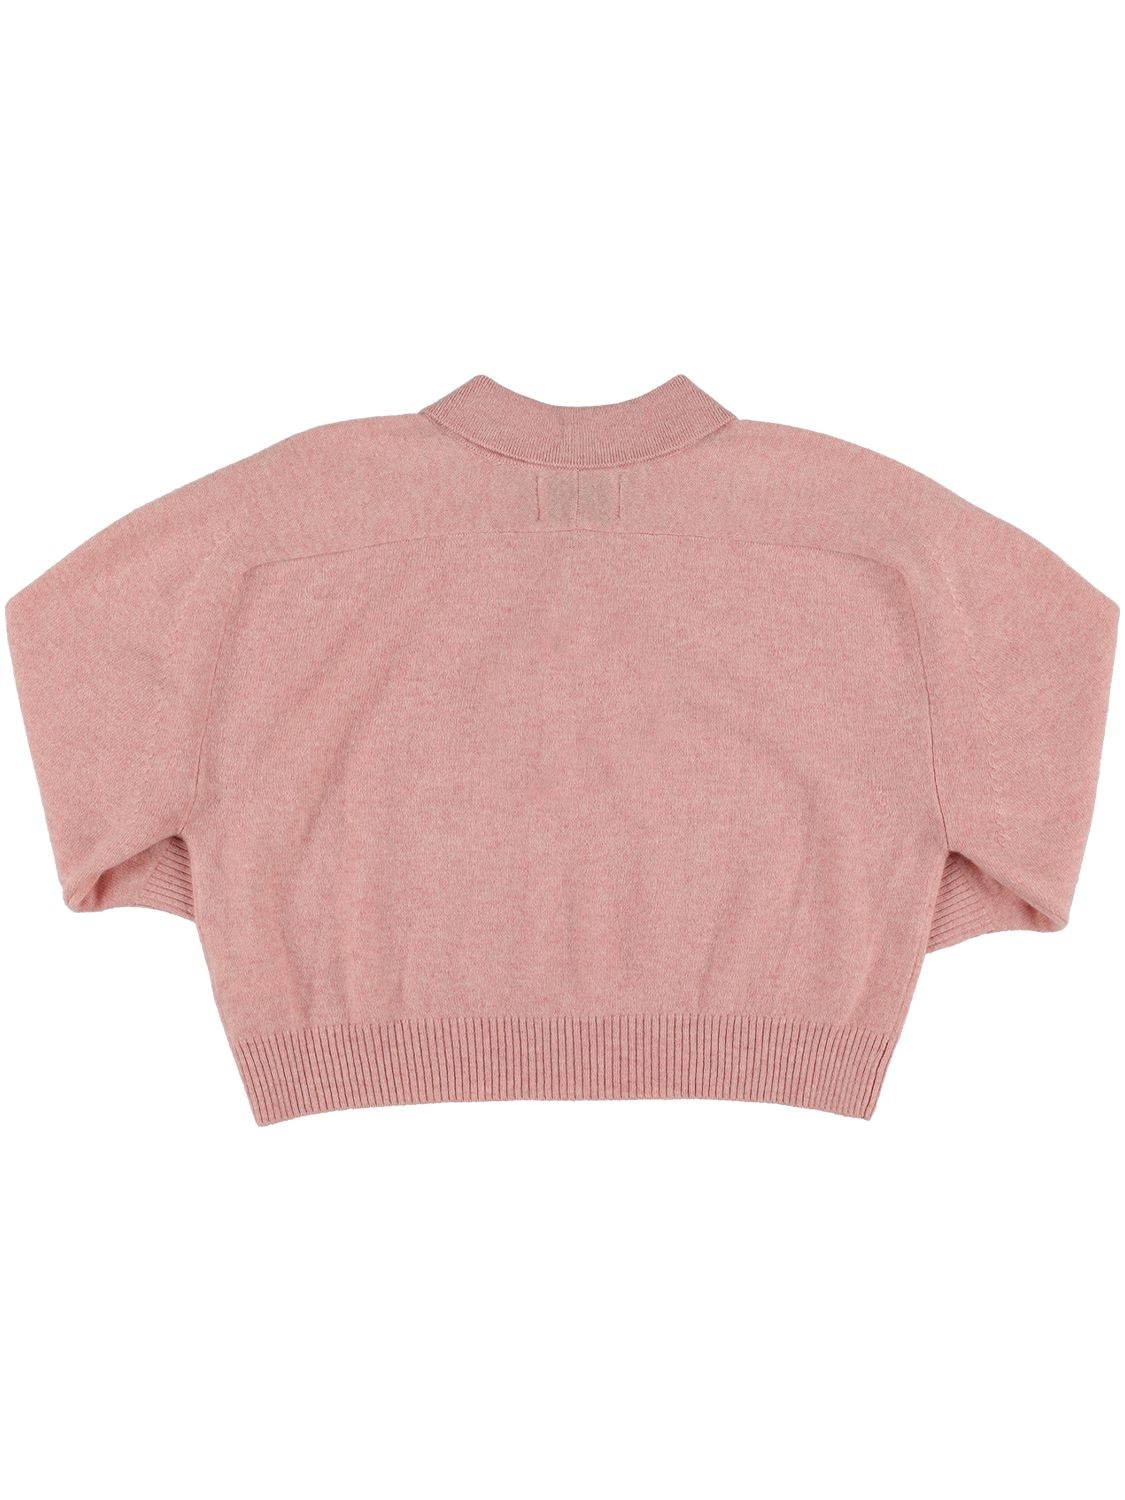 Shop Loulou Studio Oversize Cashmere Sweater In Heather Pink